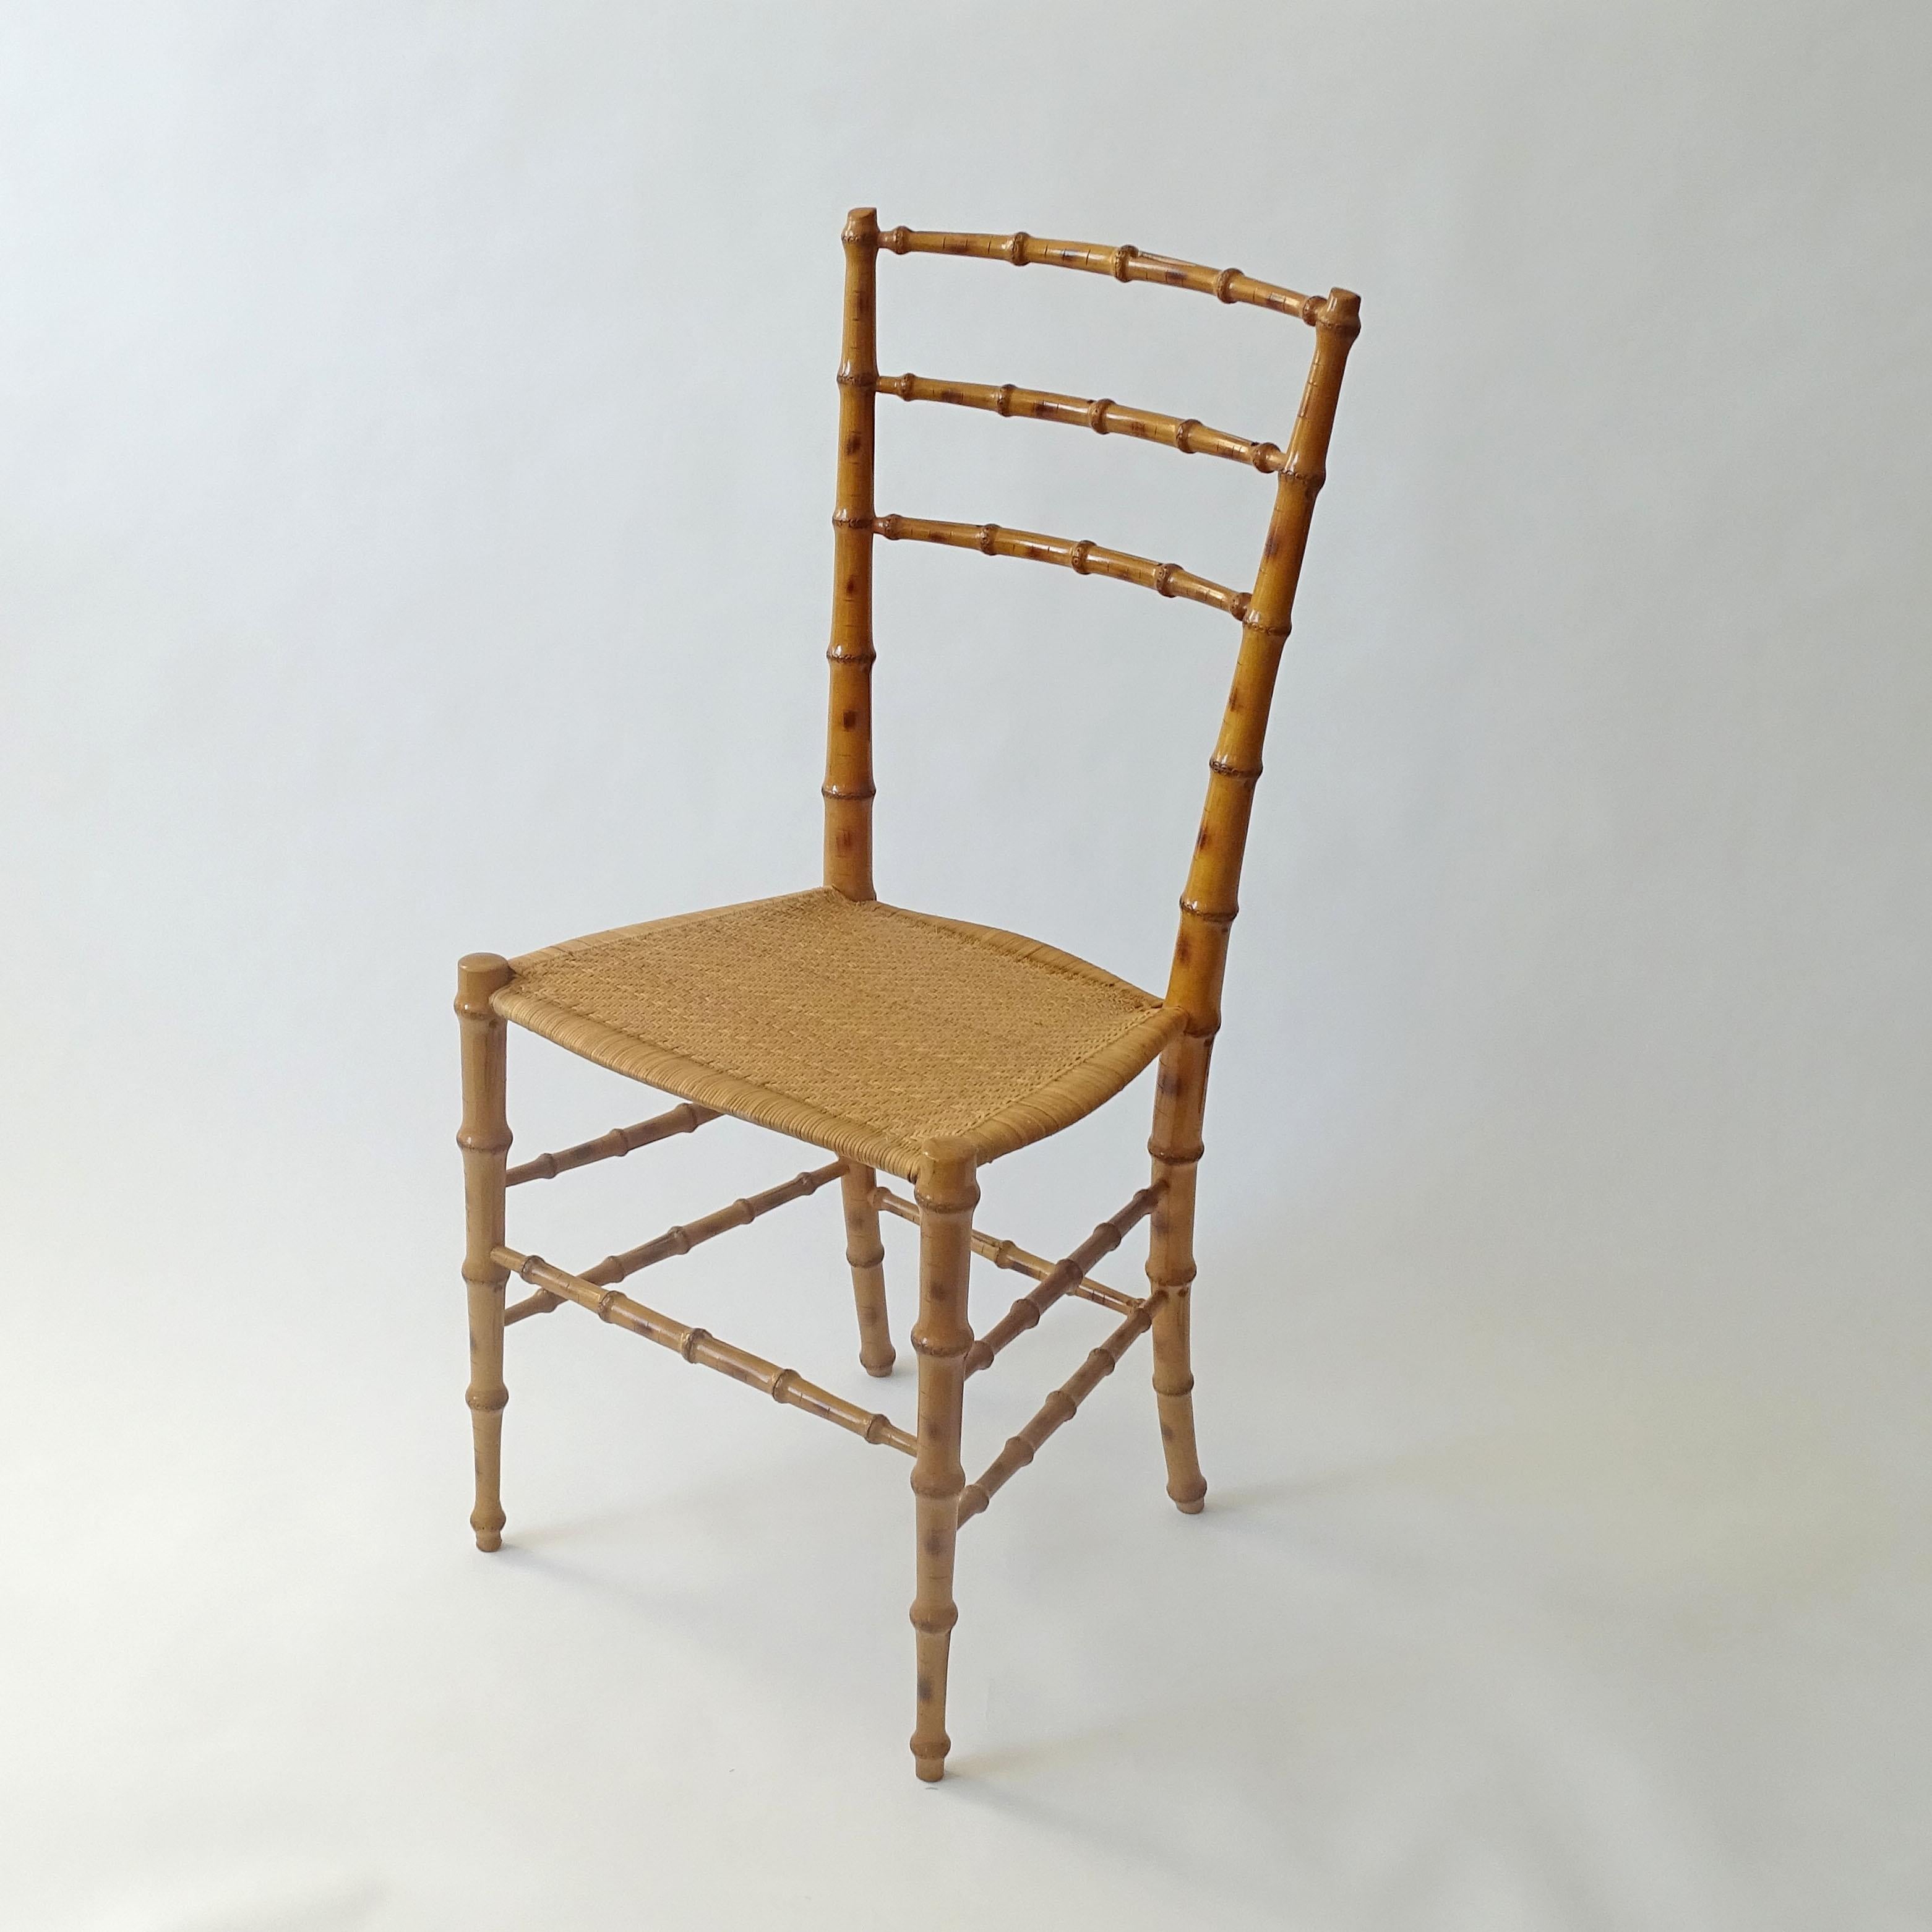 Splendid set of Six Faux Bamboo Chiavarina Chairs, Italy 1950s For Sale 2